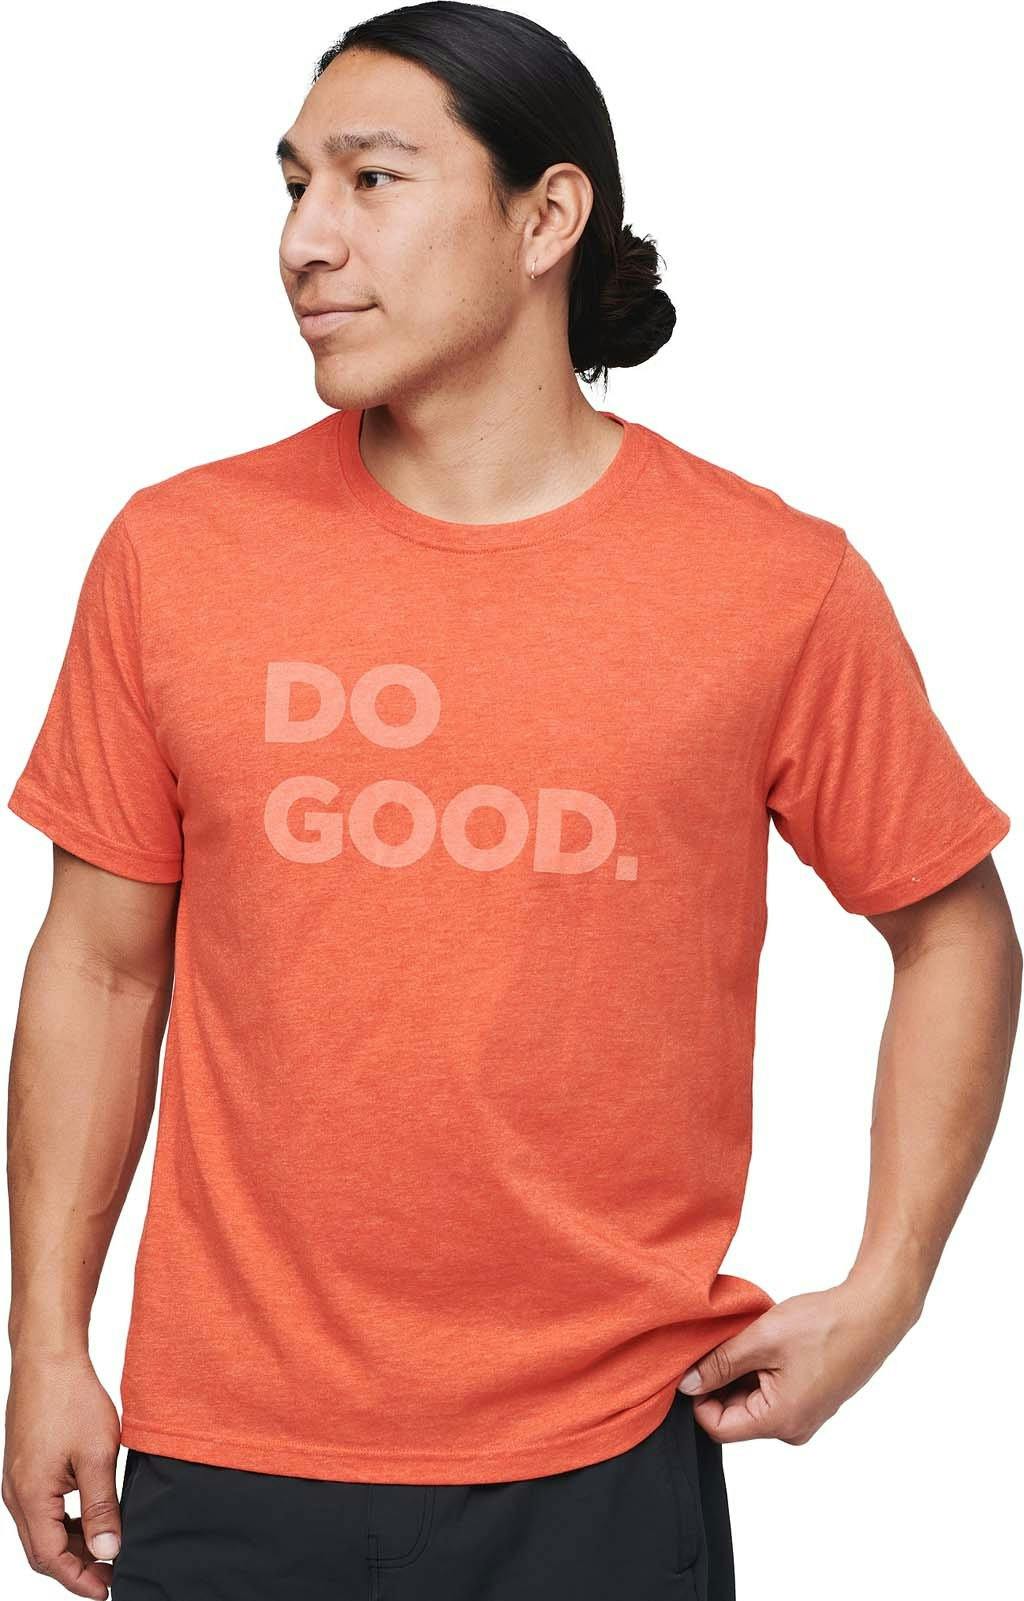 Product image for Do Good T-Shirt - Men's